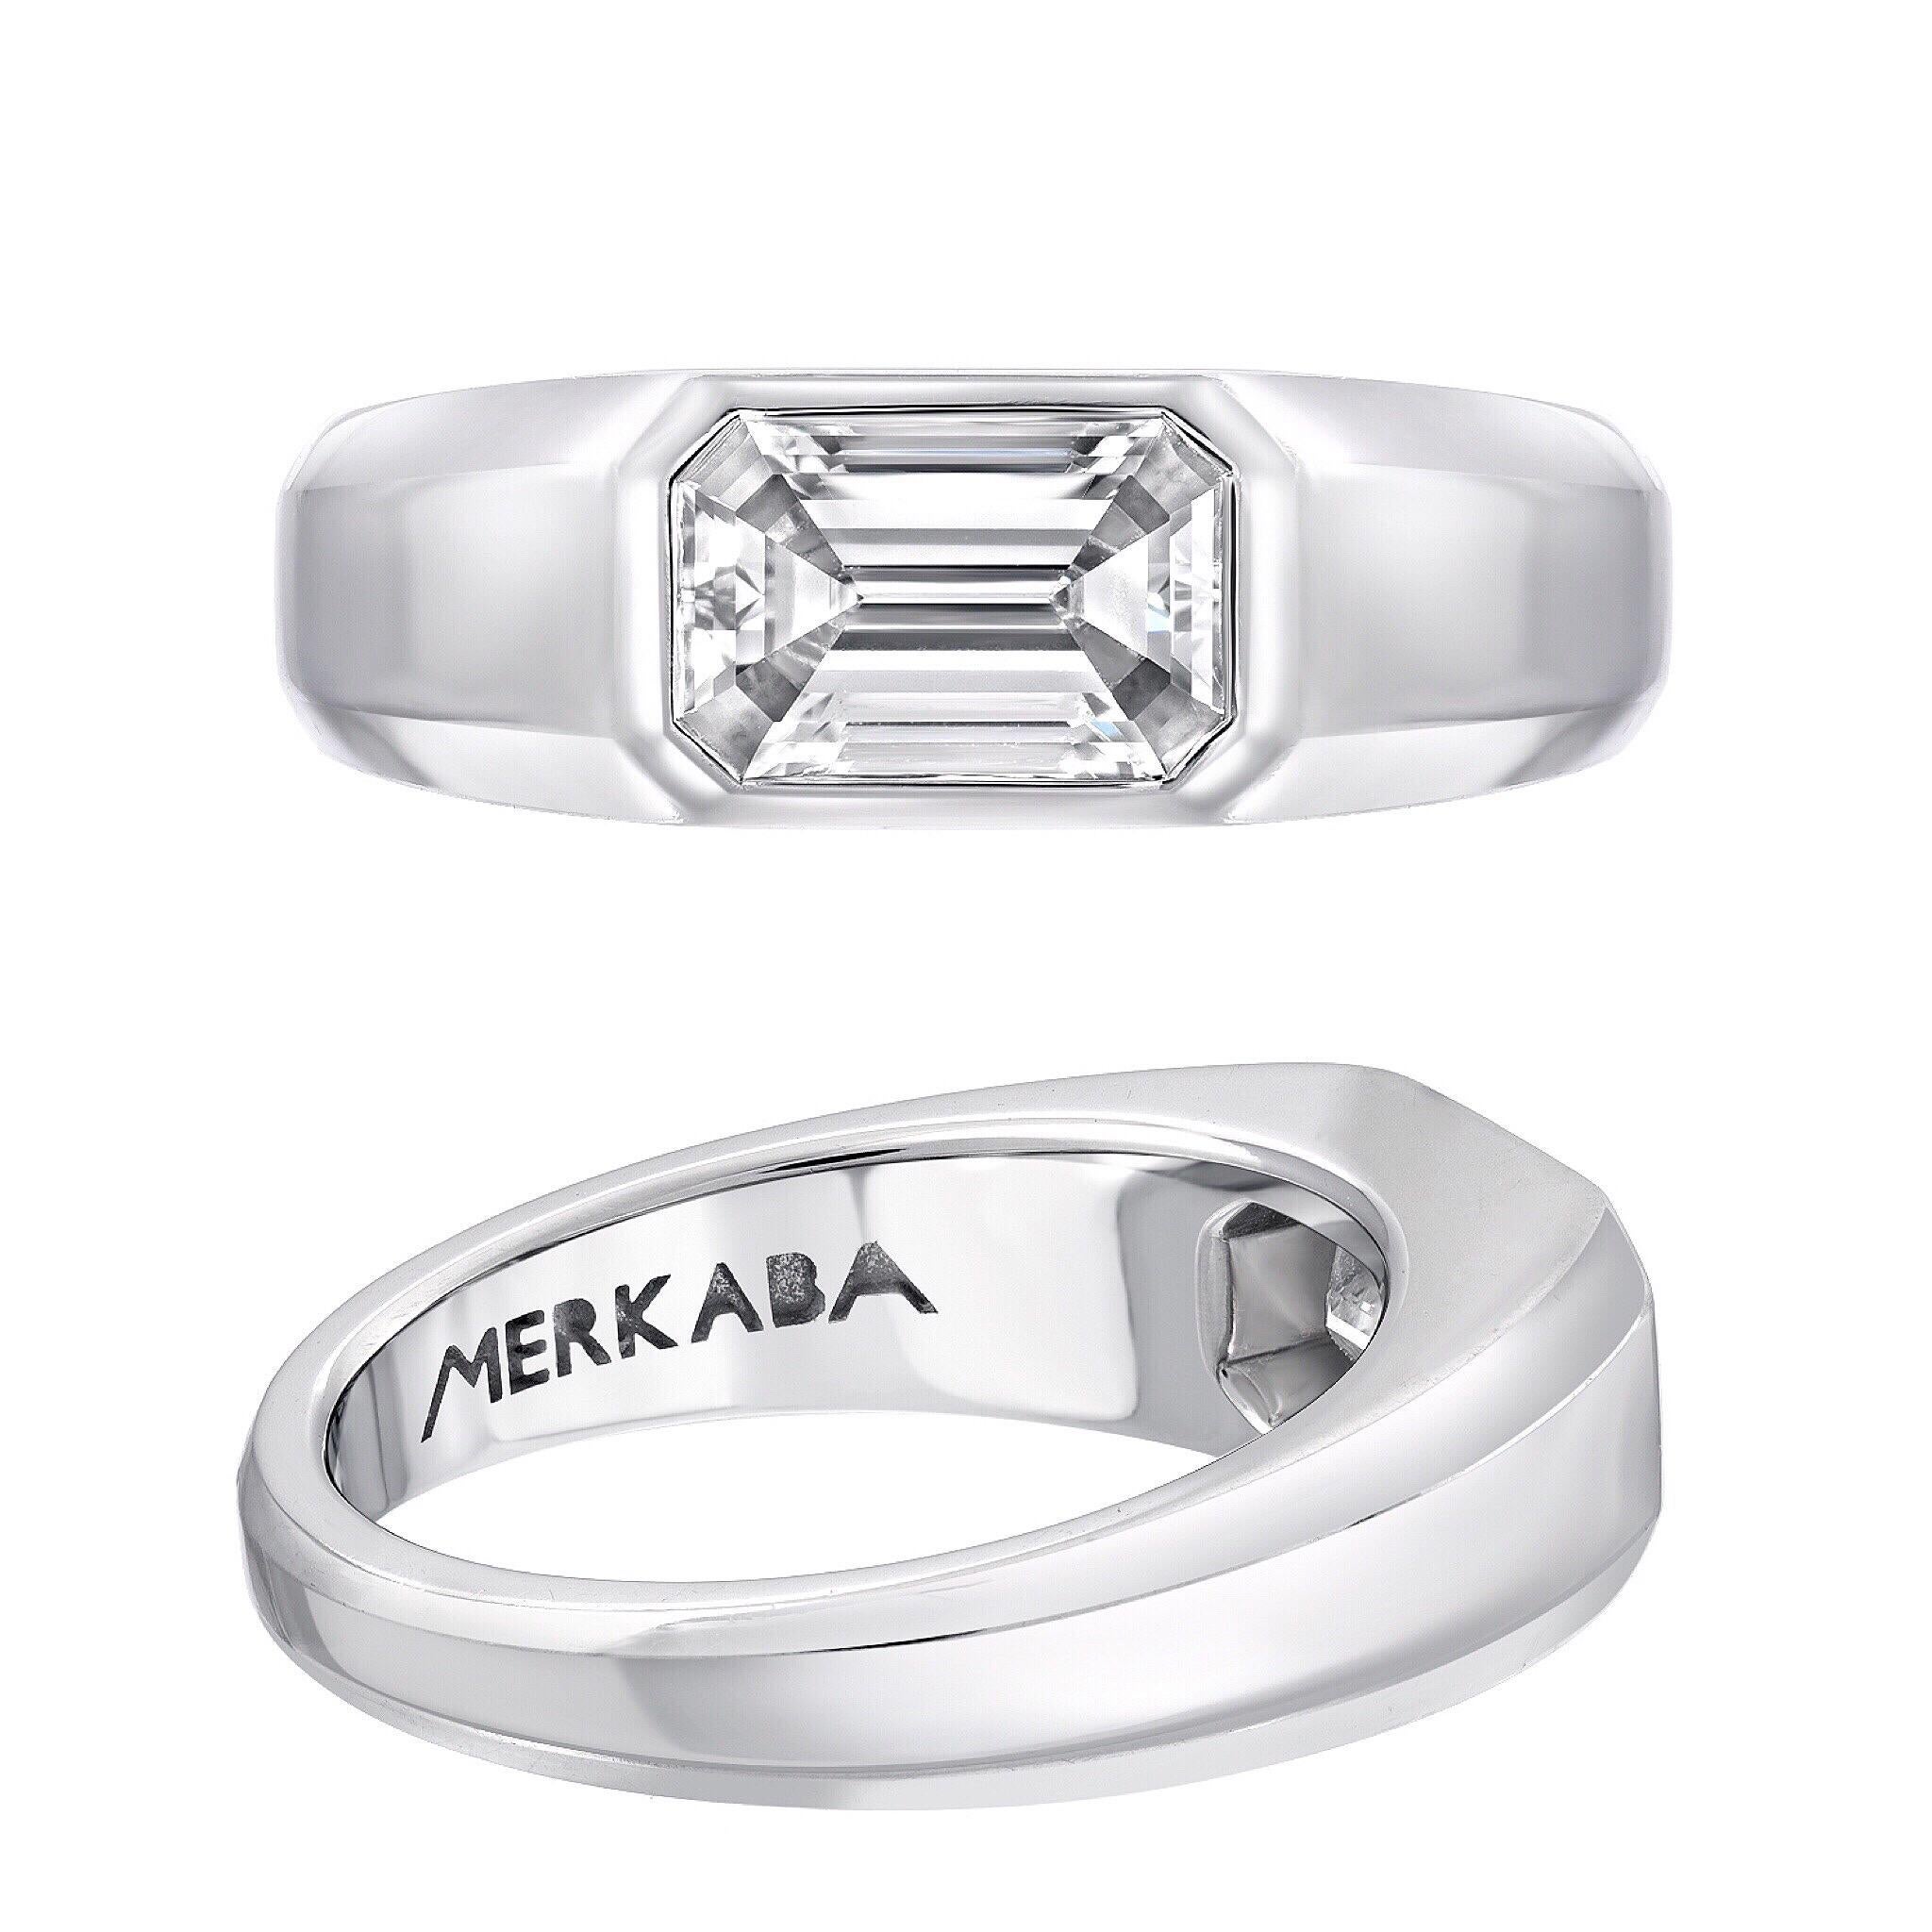 Modern Diamond Ring Emerald Cut 1.13 Carat H Color VS1 Clarity GIA Certified For Sale